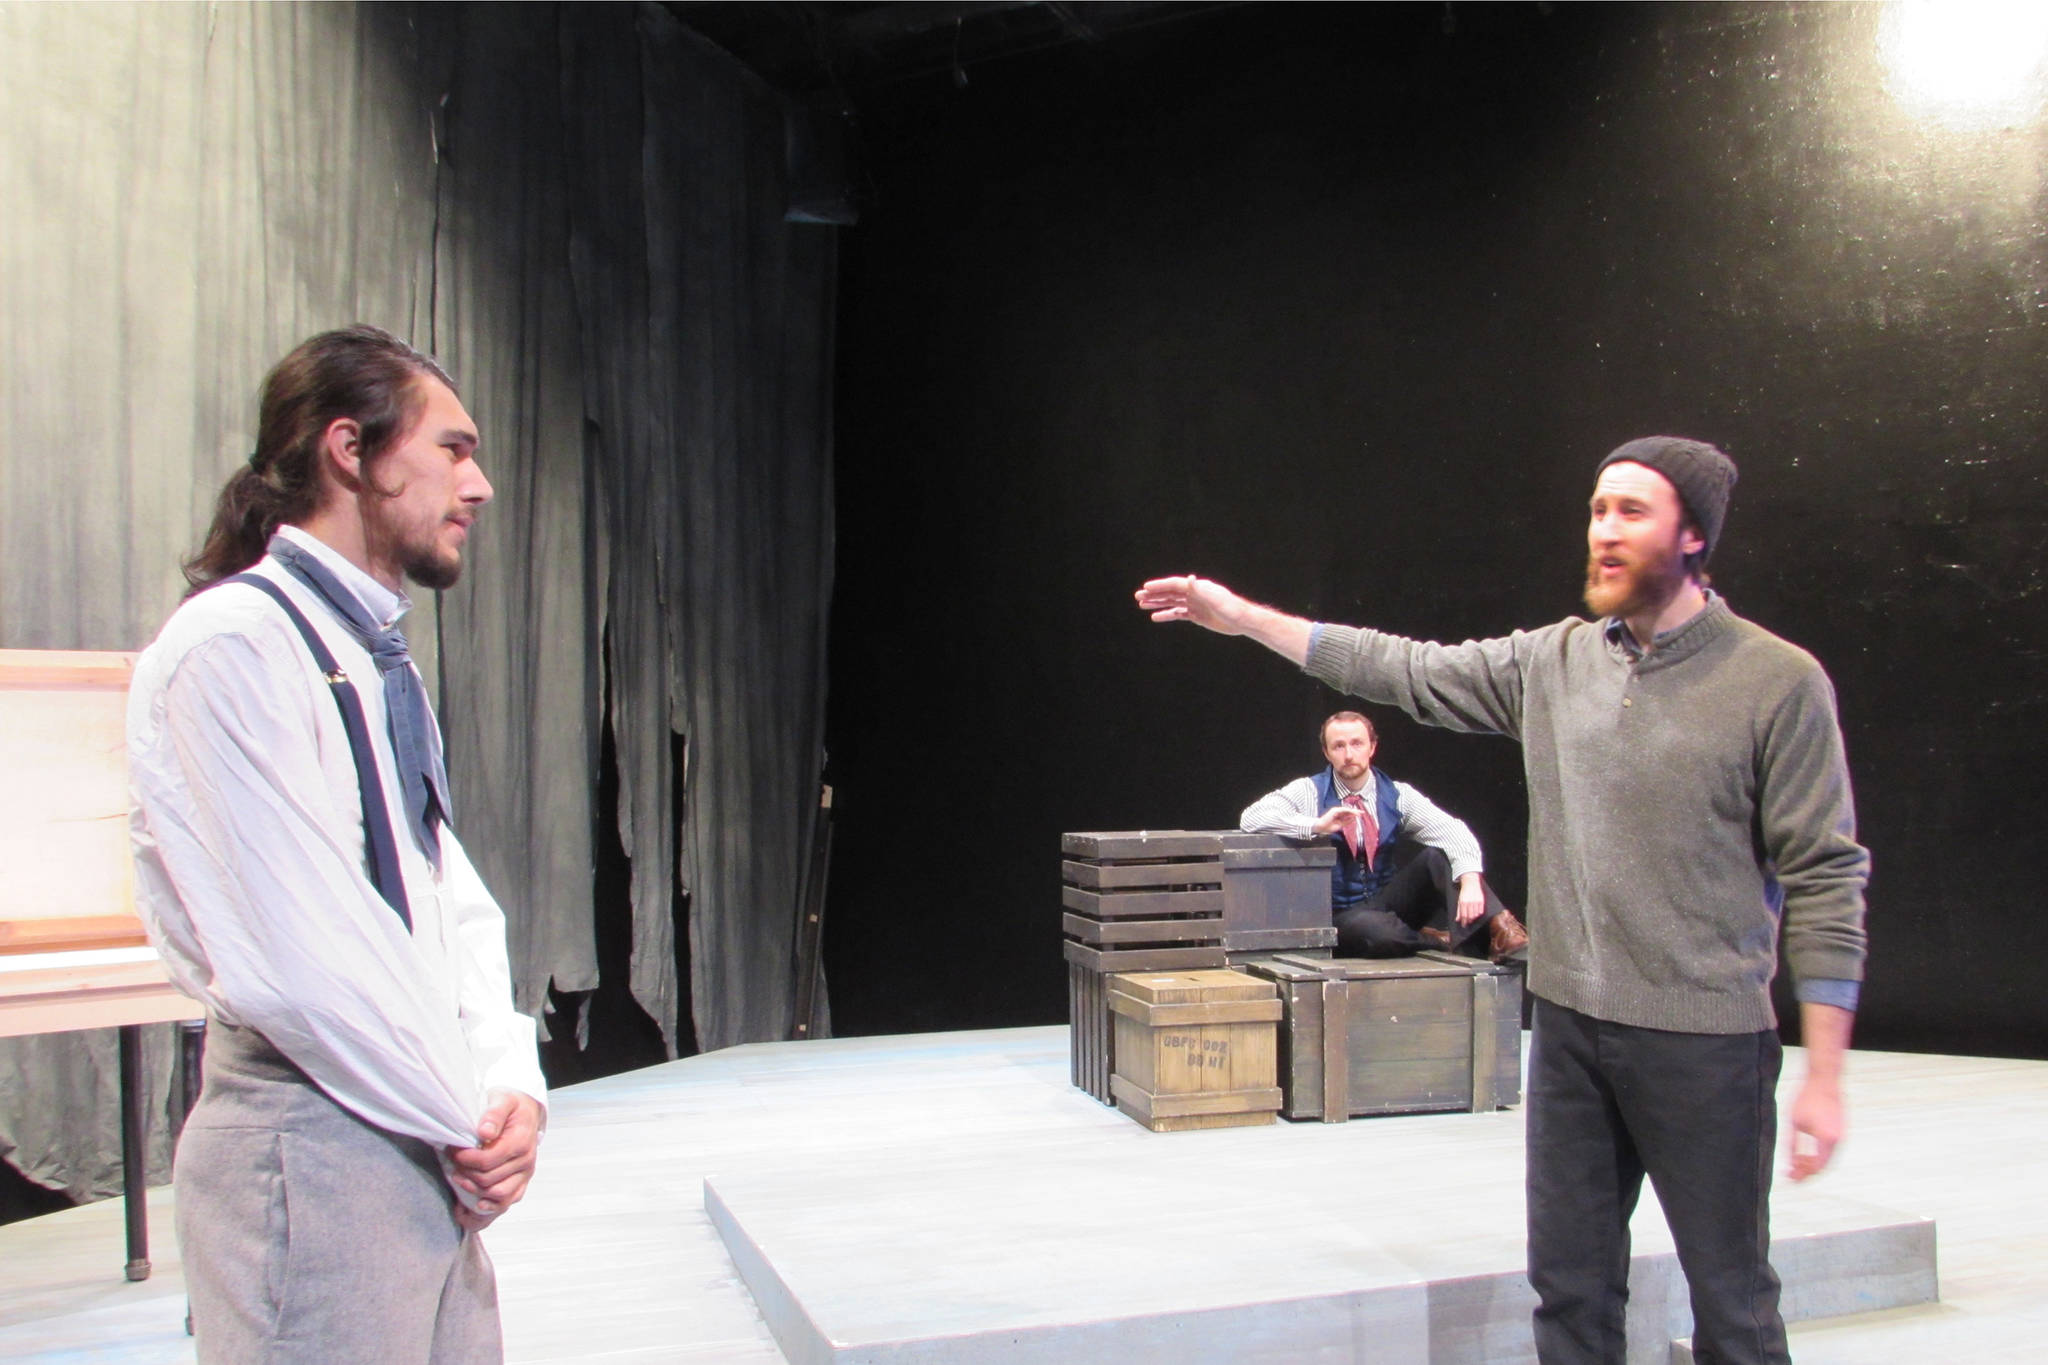 Charles Johnson, portrayed by Skyler Ray-Benson Davis, and John Handford, portrayed by Travis Morris, exchange terse words during rehearsal for “Franklin” while Henry Said, portrayed by Connor Chaney, looks on. (Ben Hohenstatt | Capital City Weekly)